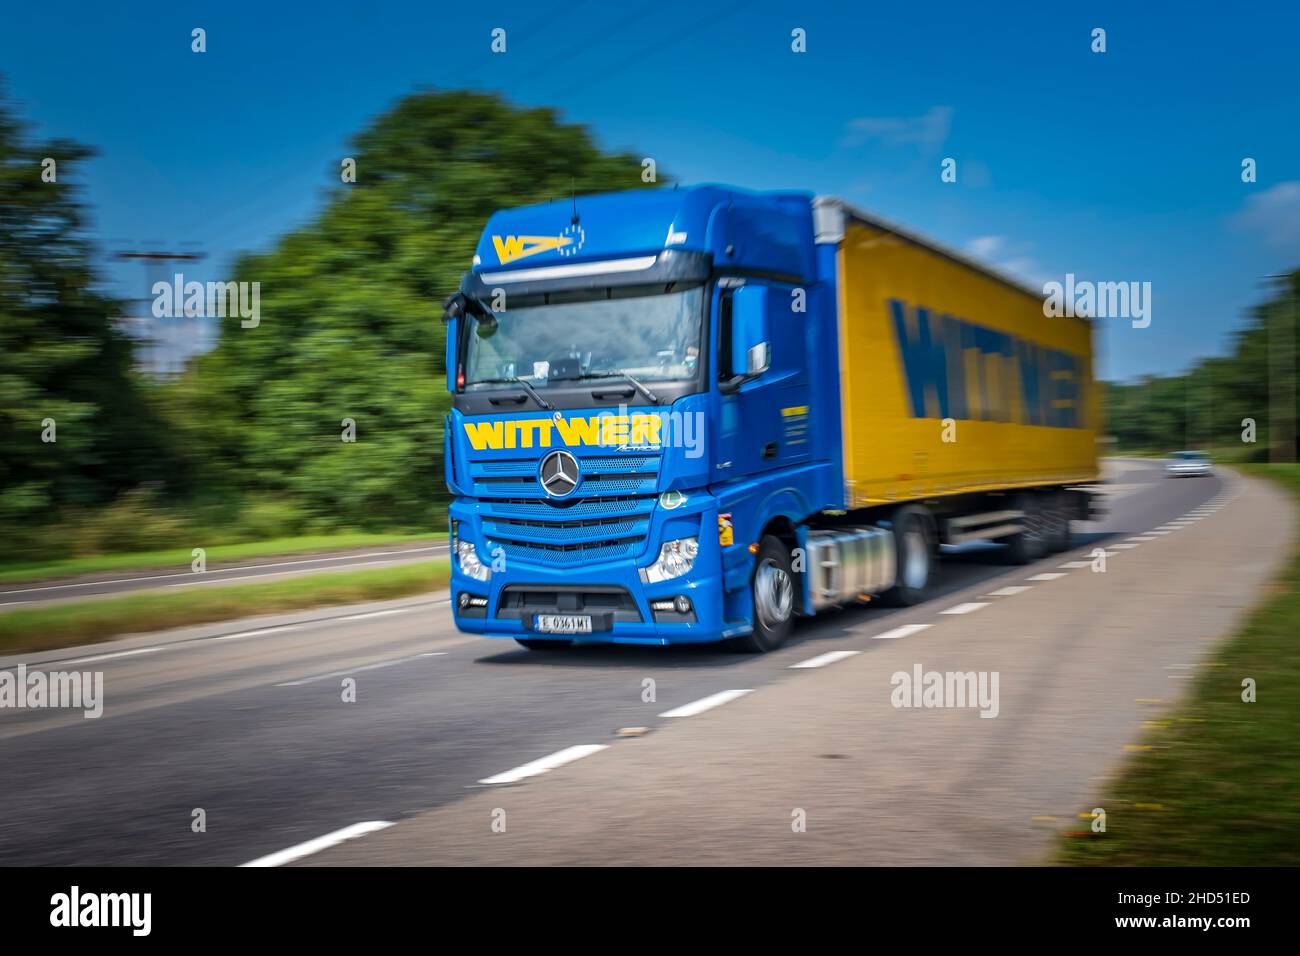 A Wittwer Spedition and Logistik GmbH articulated lorry at speed on a dual carriageway. Stock Photo